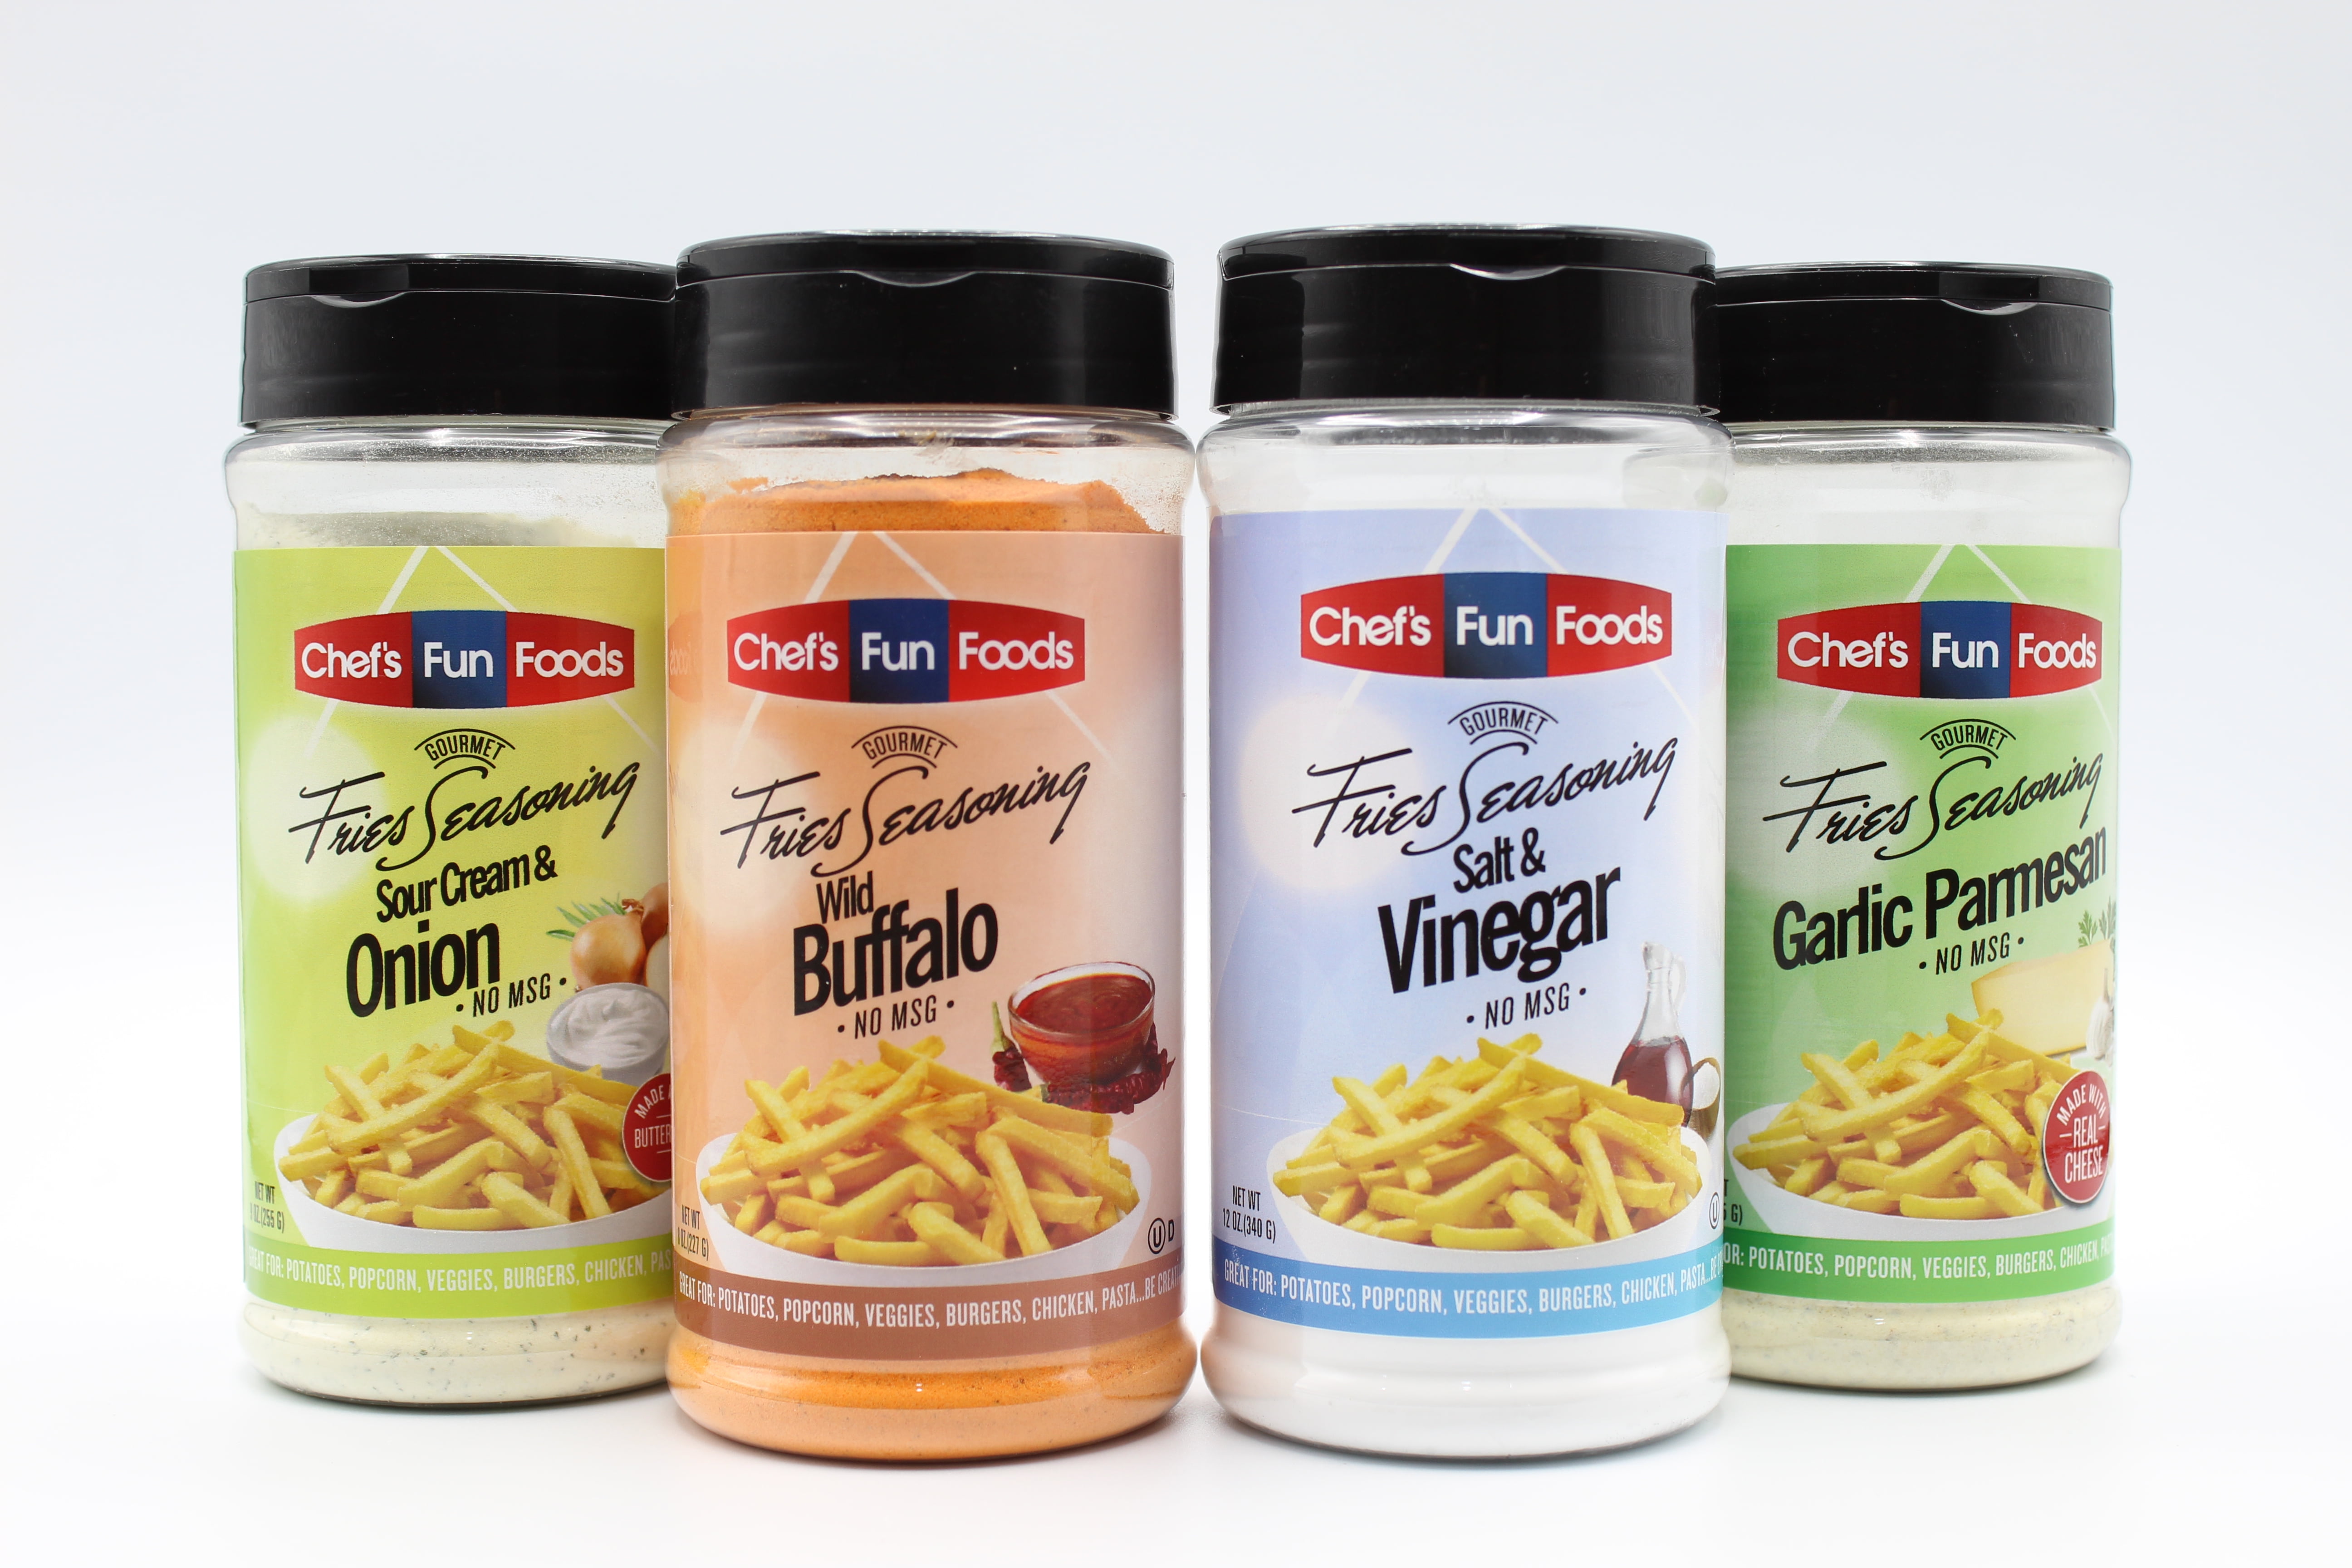 Chef's Fun Foods - Gourmet Food Seasonings | Kosher Food for Restaurants and Home Cooks |Sour Cream & Onion, Flame Grilled BBQ, Garlic Parmesan Combo